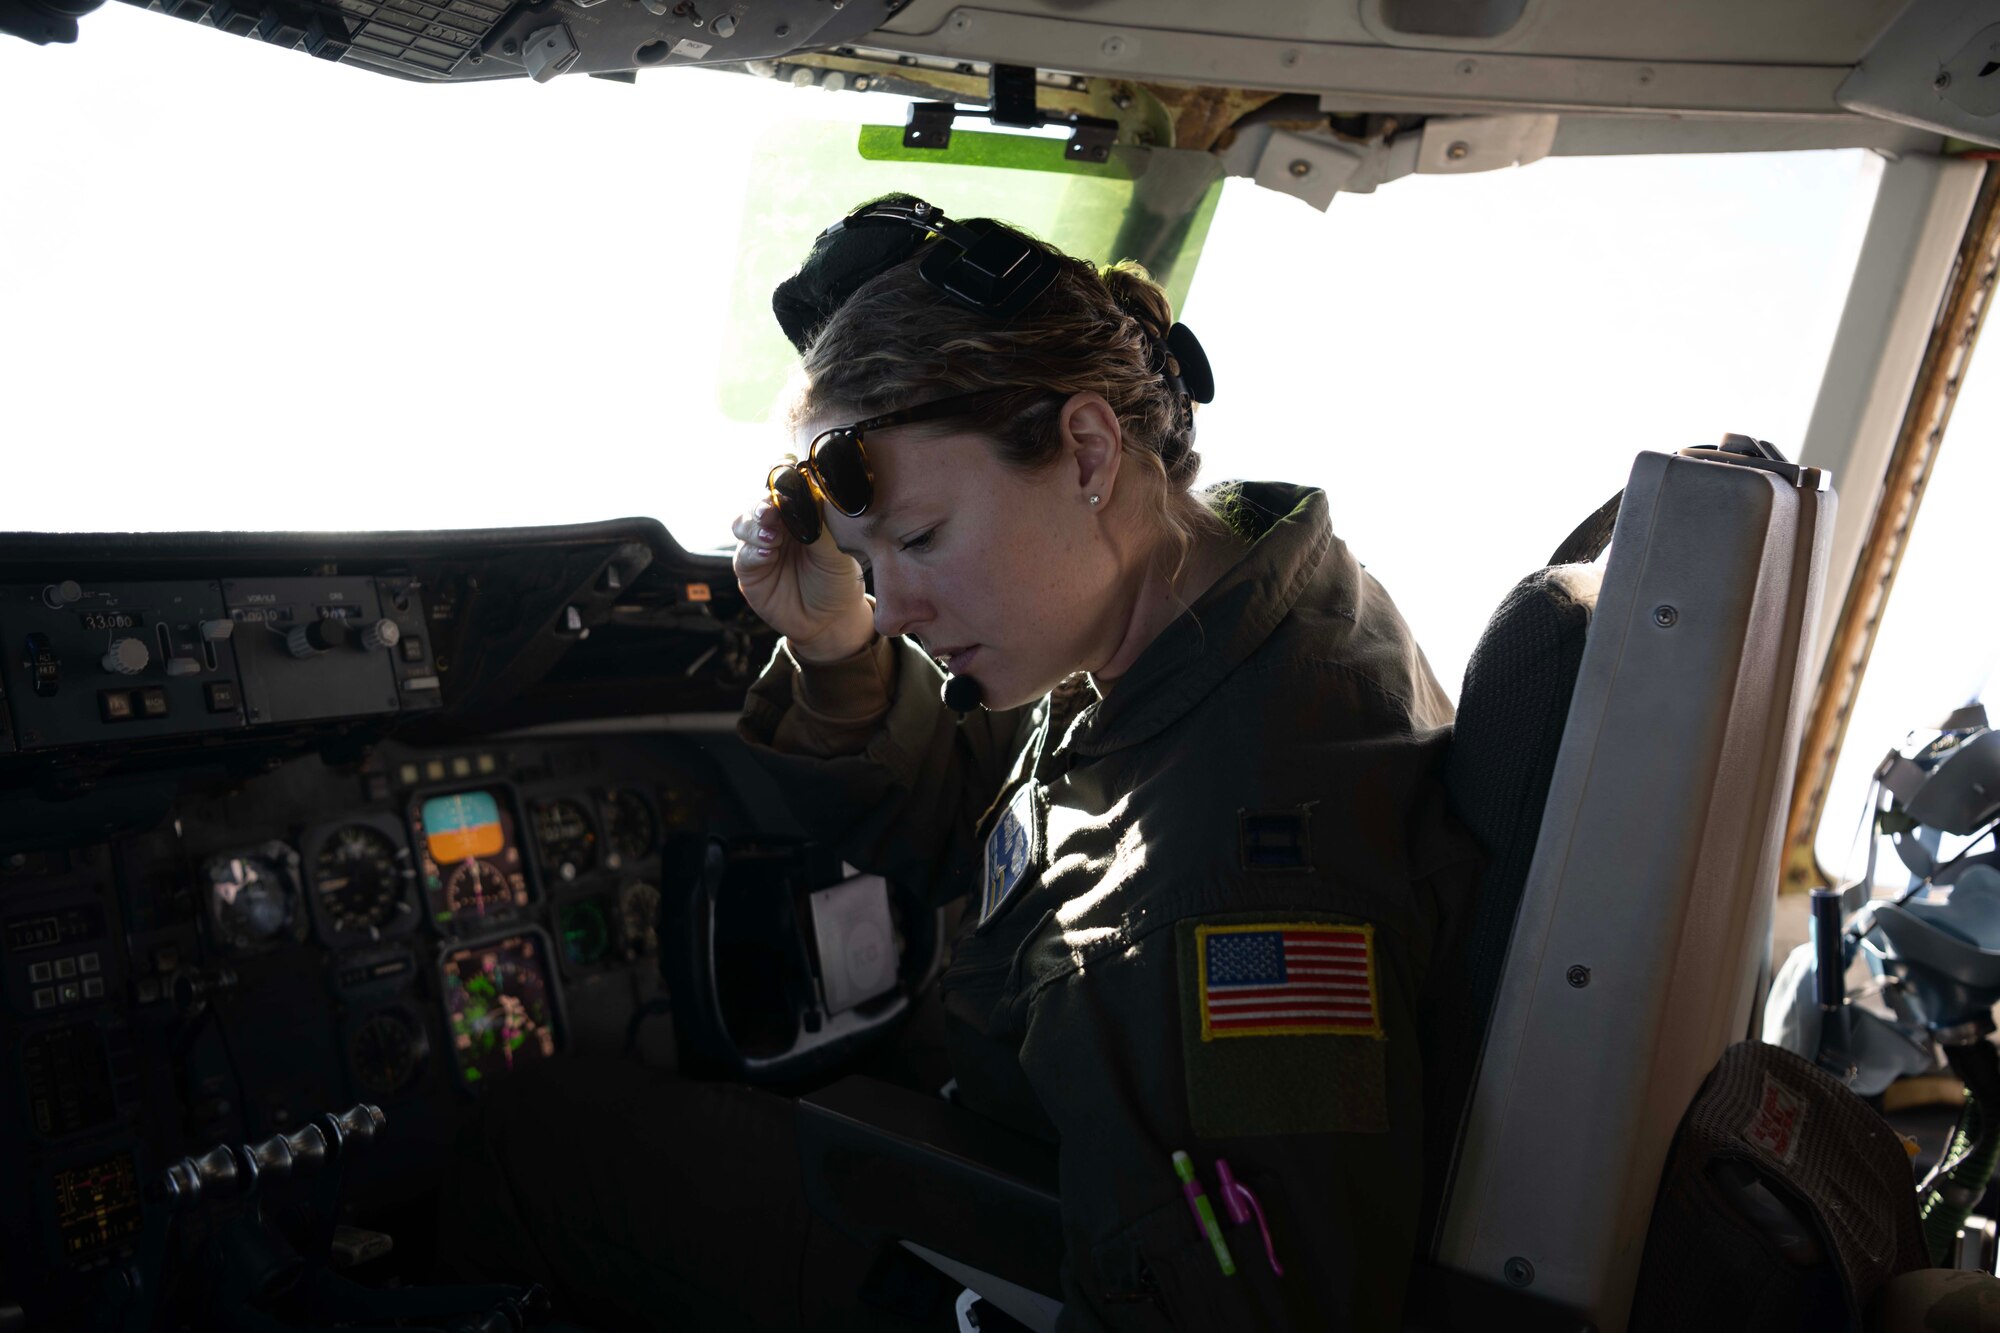 An Airman sits in the pilot seat of a military aircraft